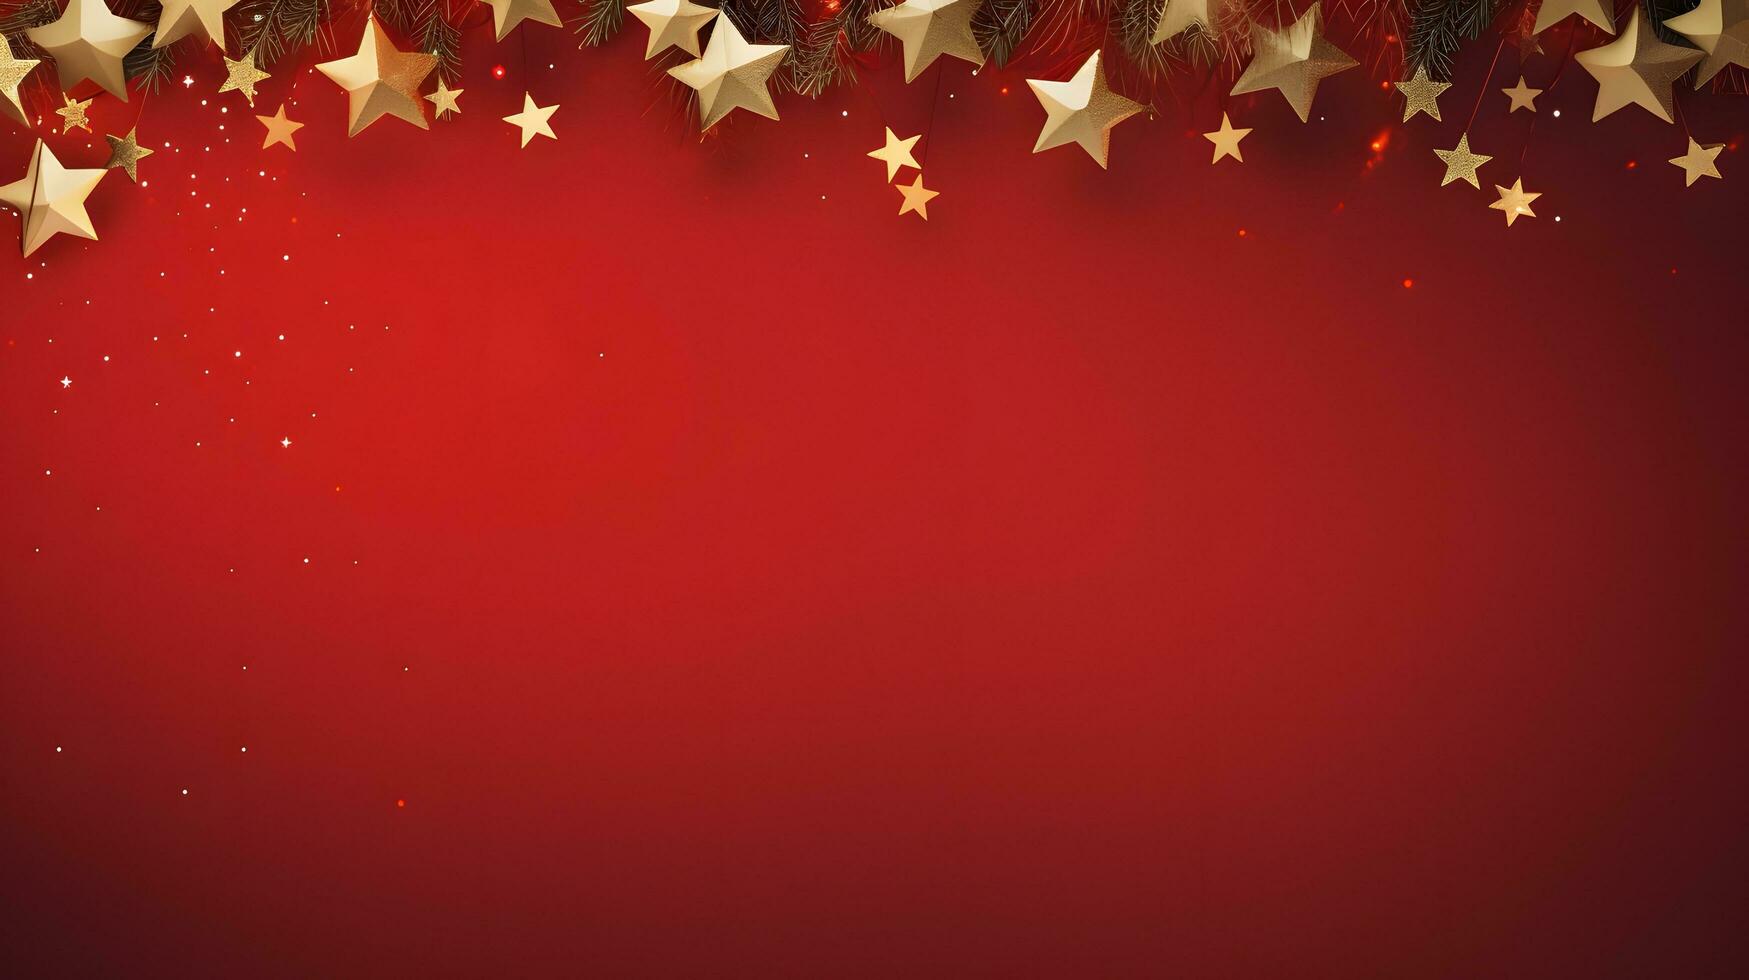 A Festive Red Christmas Background with a Snowy Bottom photo